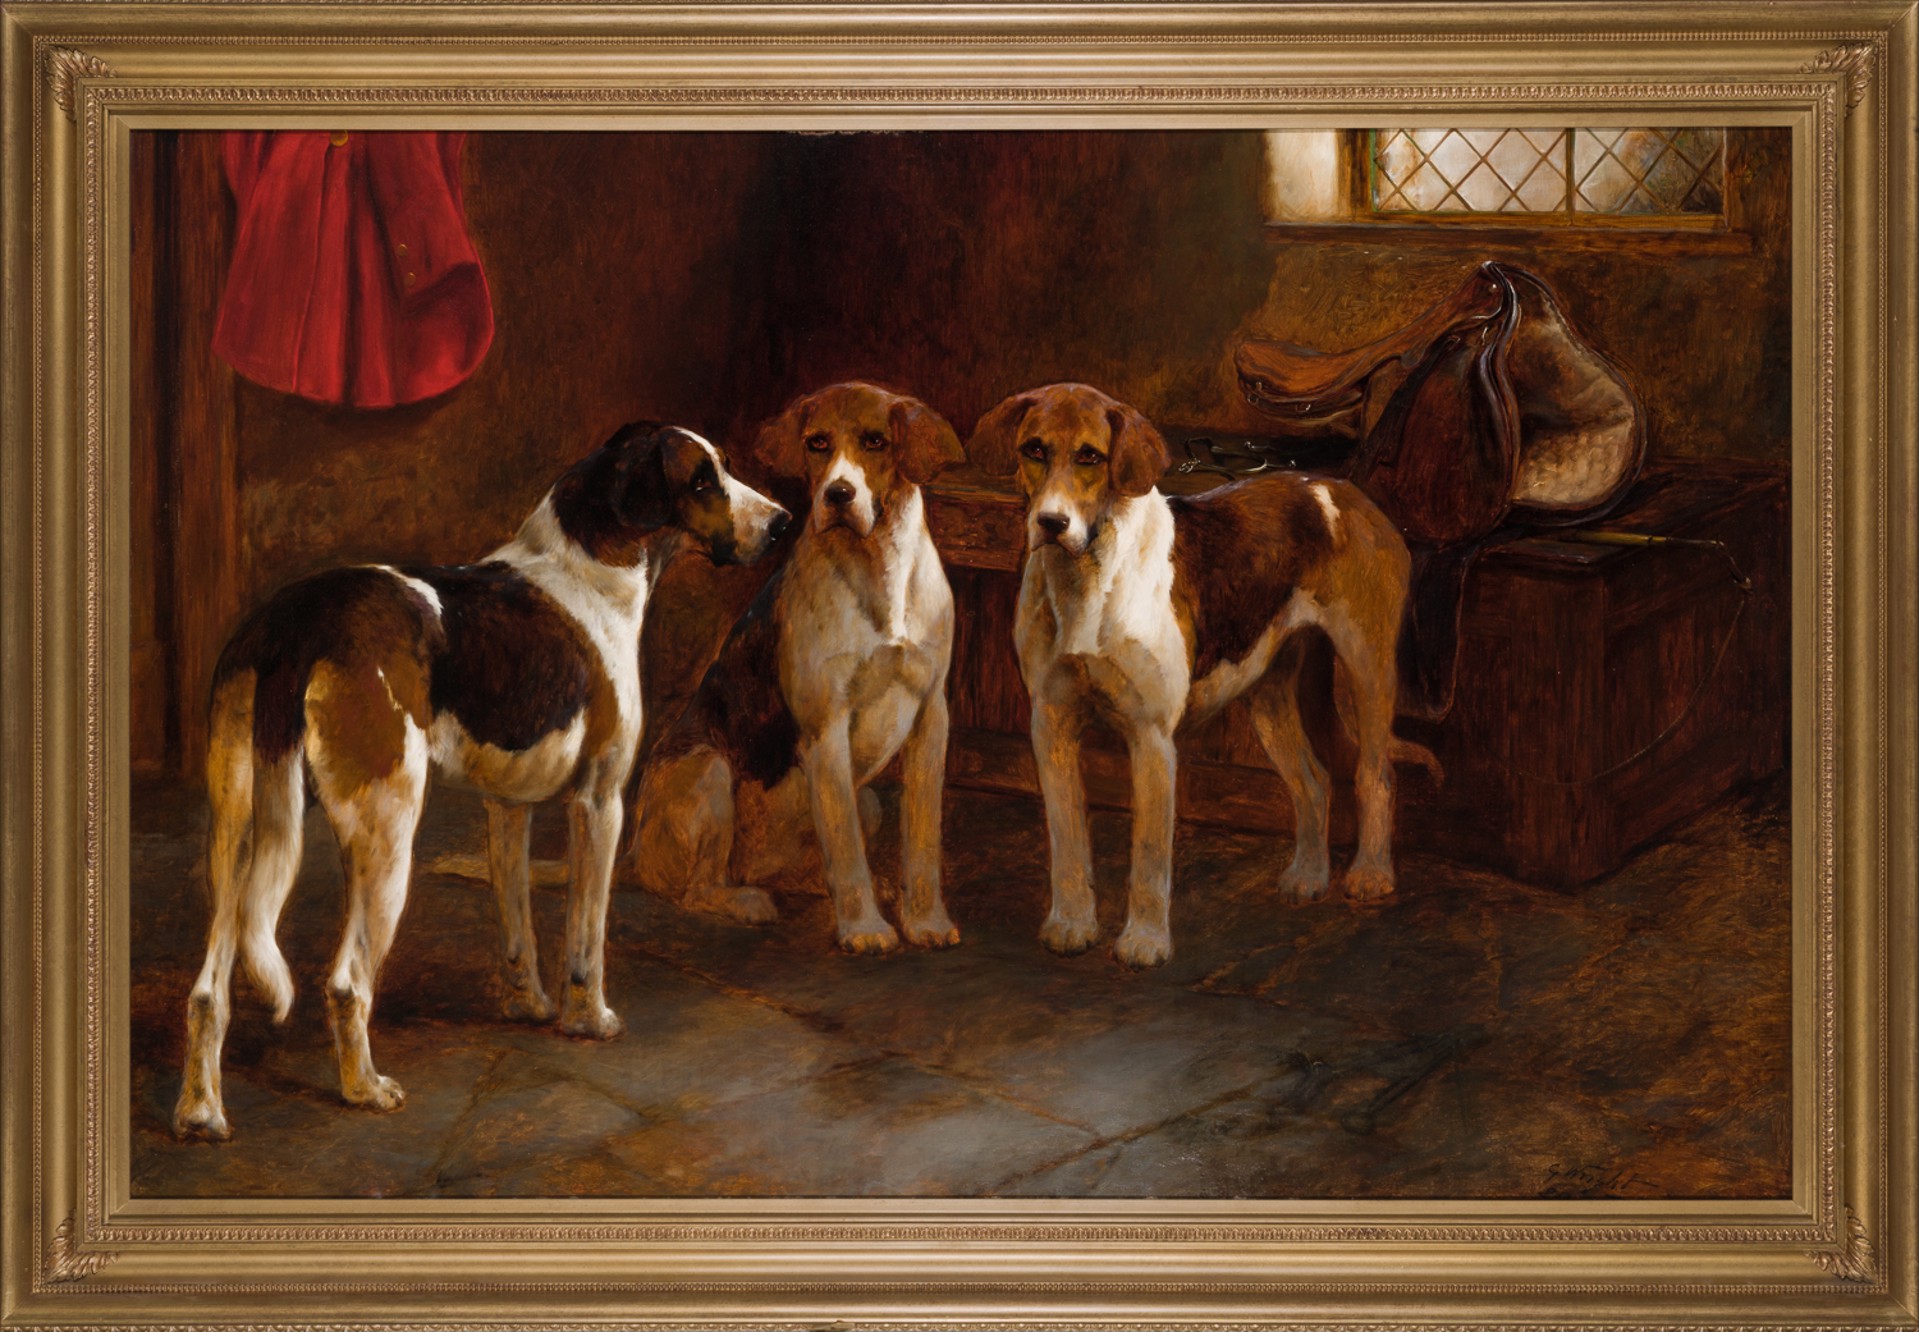 HOUNDS IN A KENNEL by George Wright